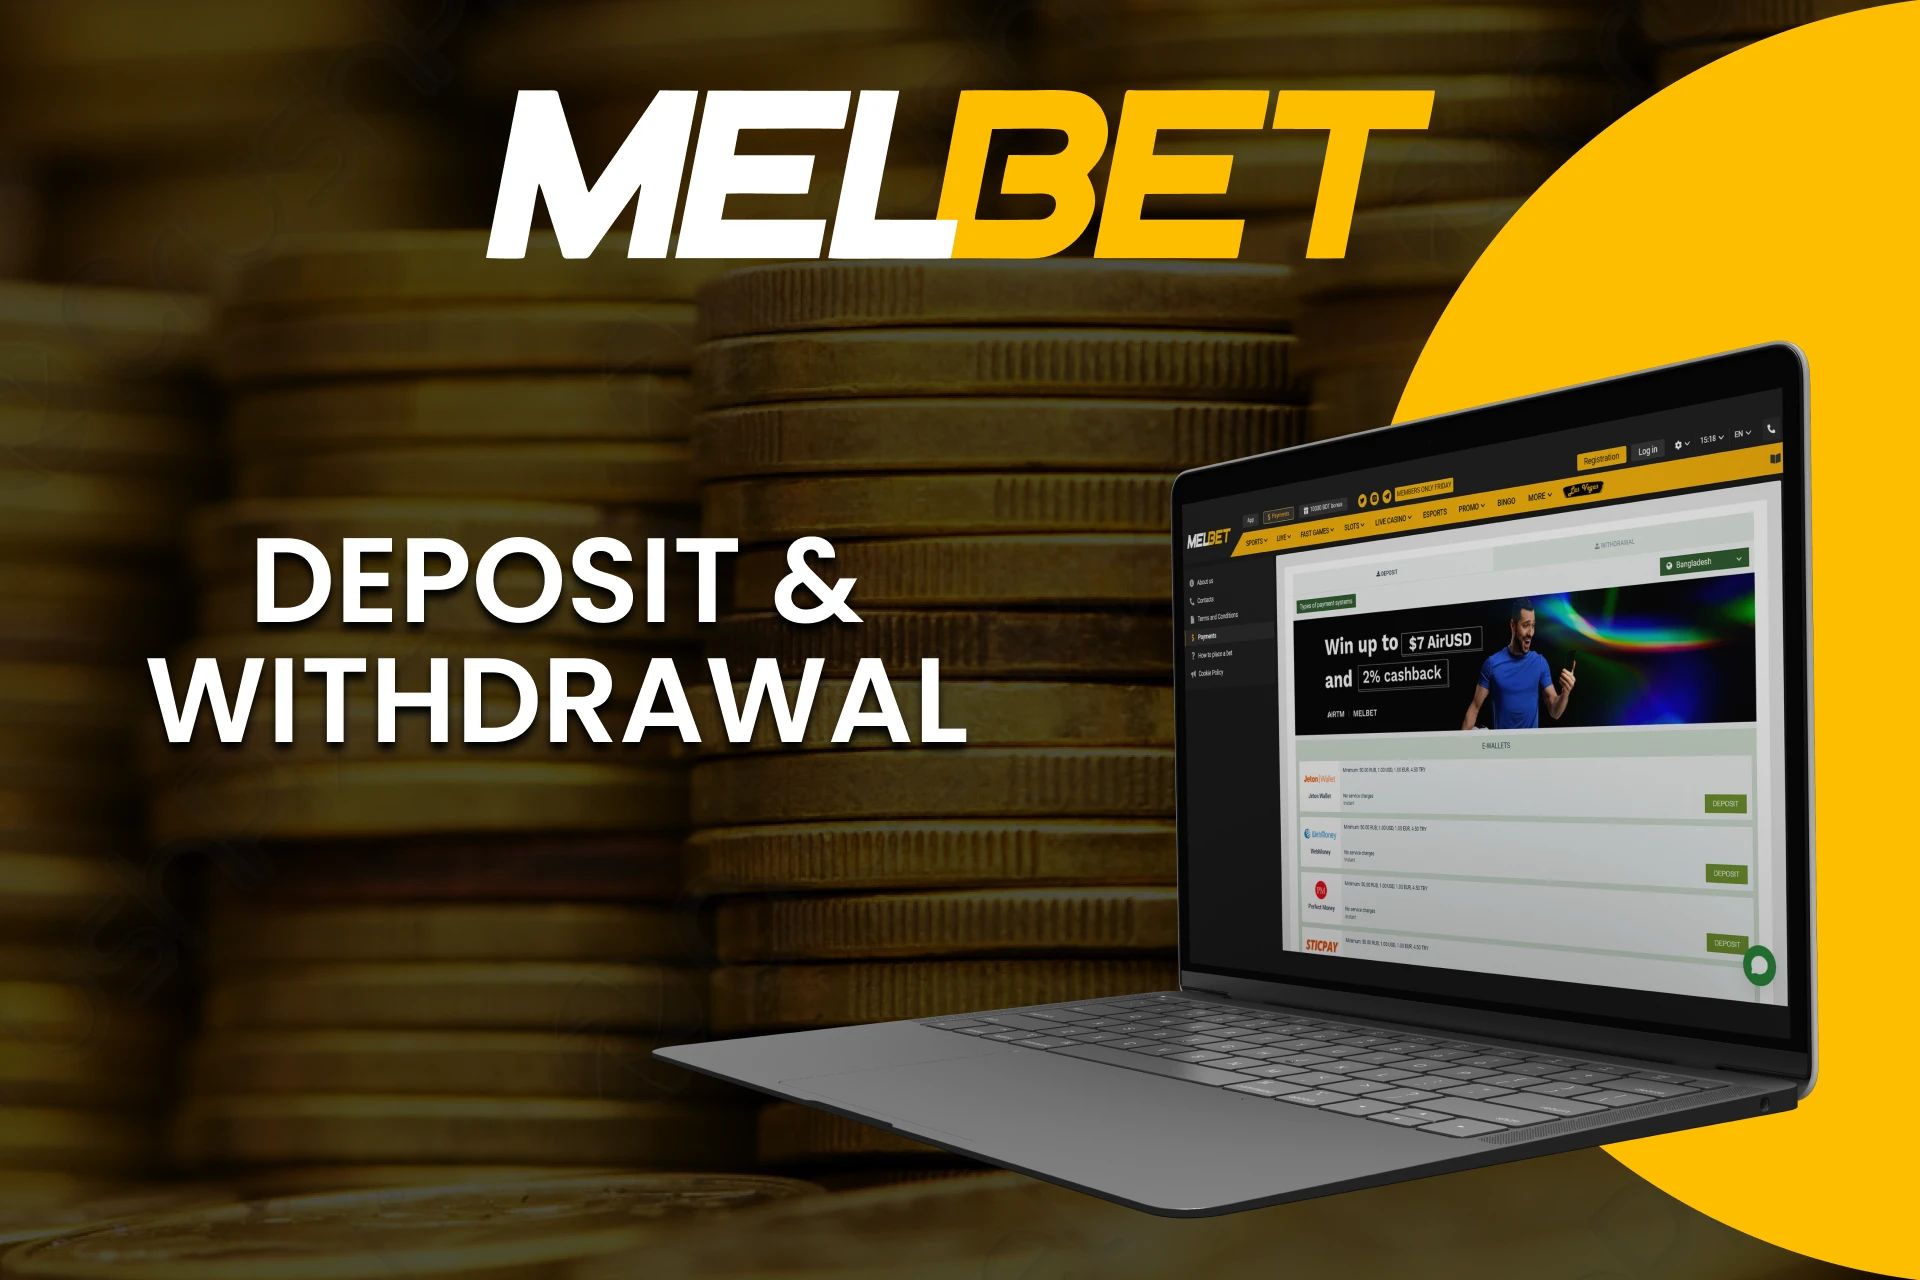 Find out about withdrawal and deposit methods on Melbet.